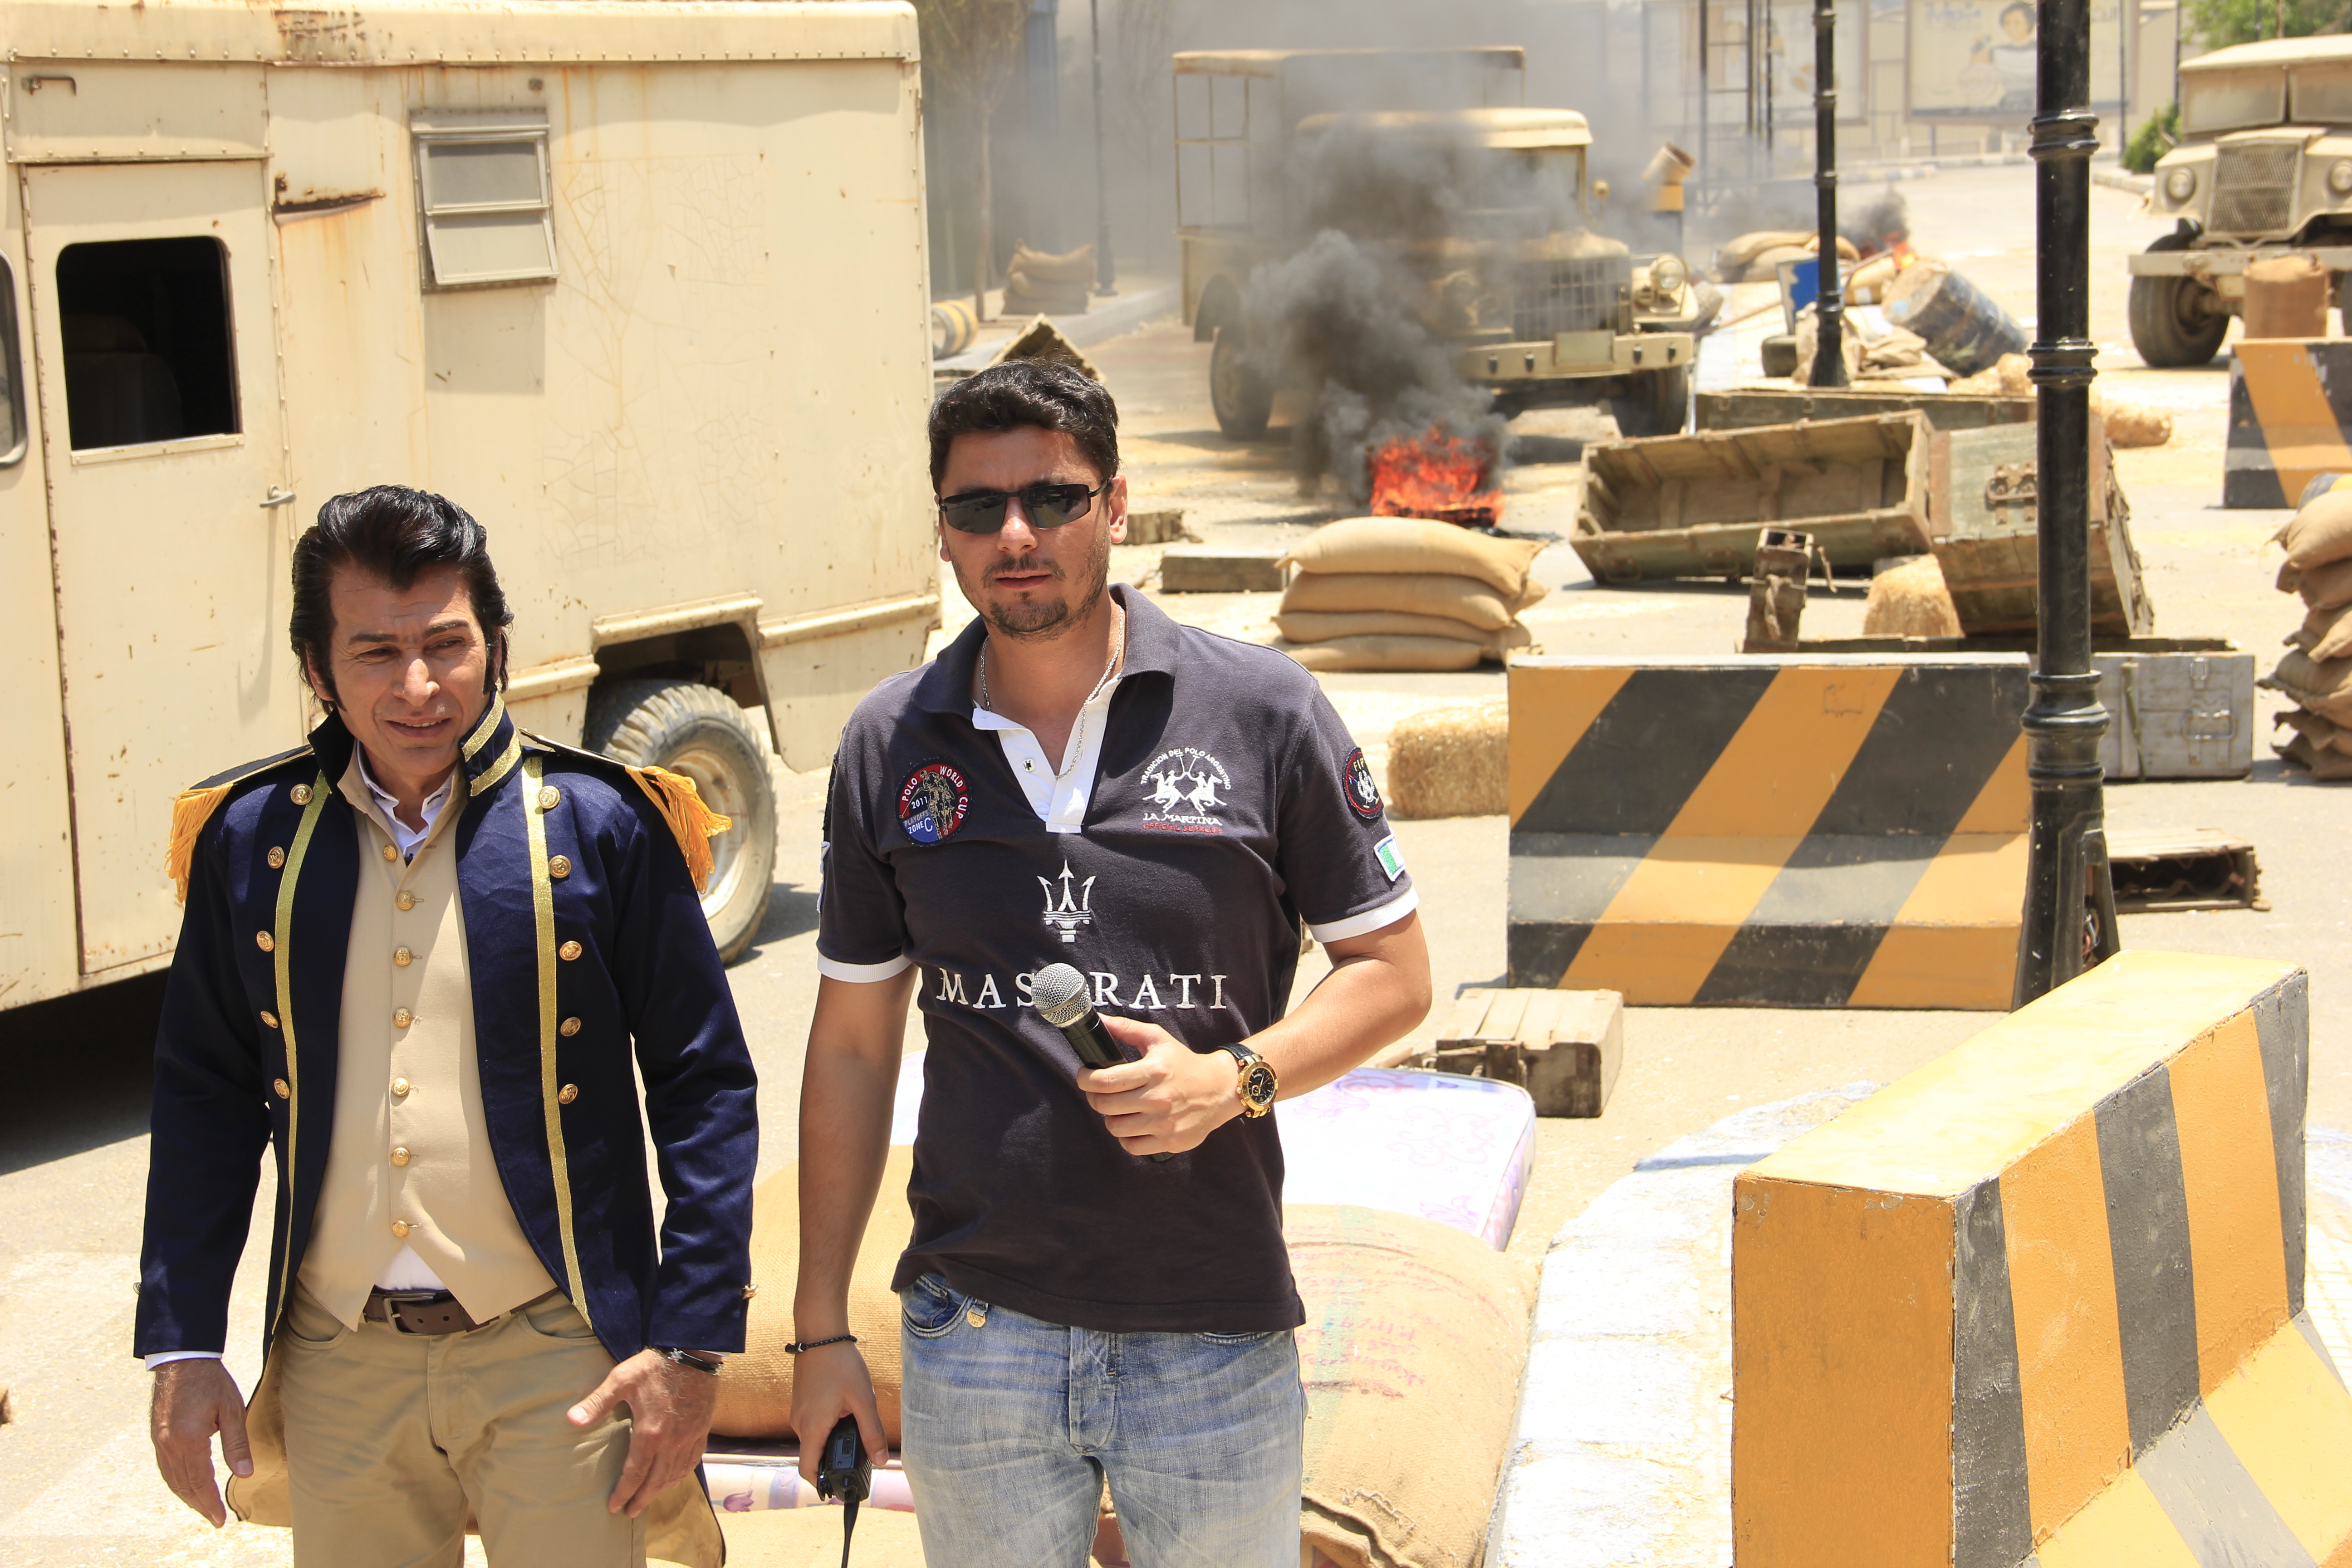 Ali Abu Khumra in Location The Biggest Liar - shooting